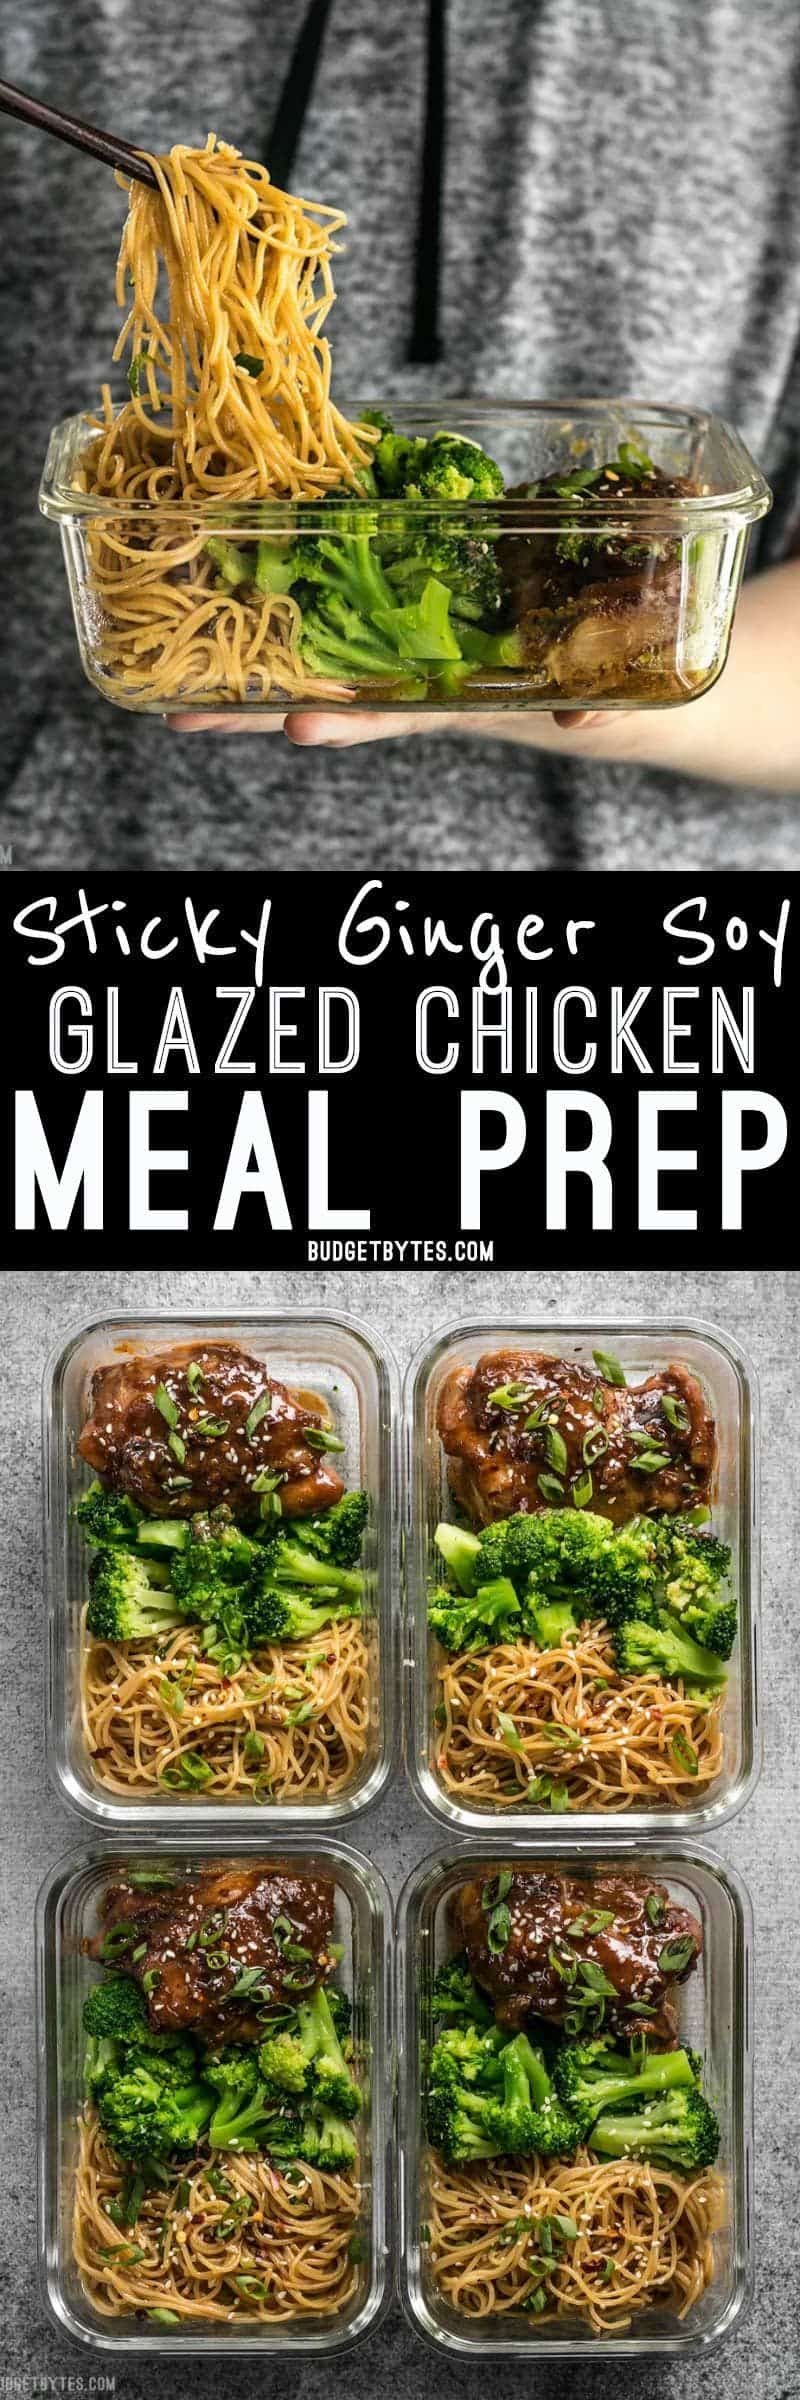 Salty, sweet, and rich flavors dominate this Sticky Ginger Soy Glazed Chicken Meal Prep Box, with tender broccoli florets for good measure. BudgetBytes.com